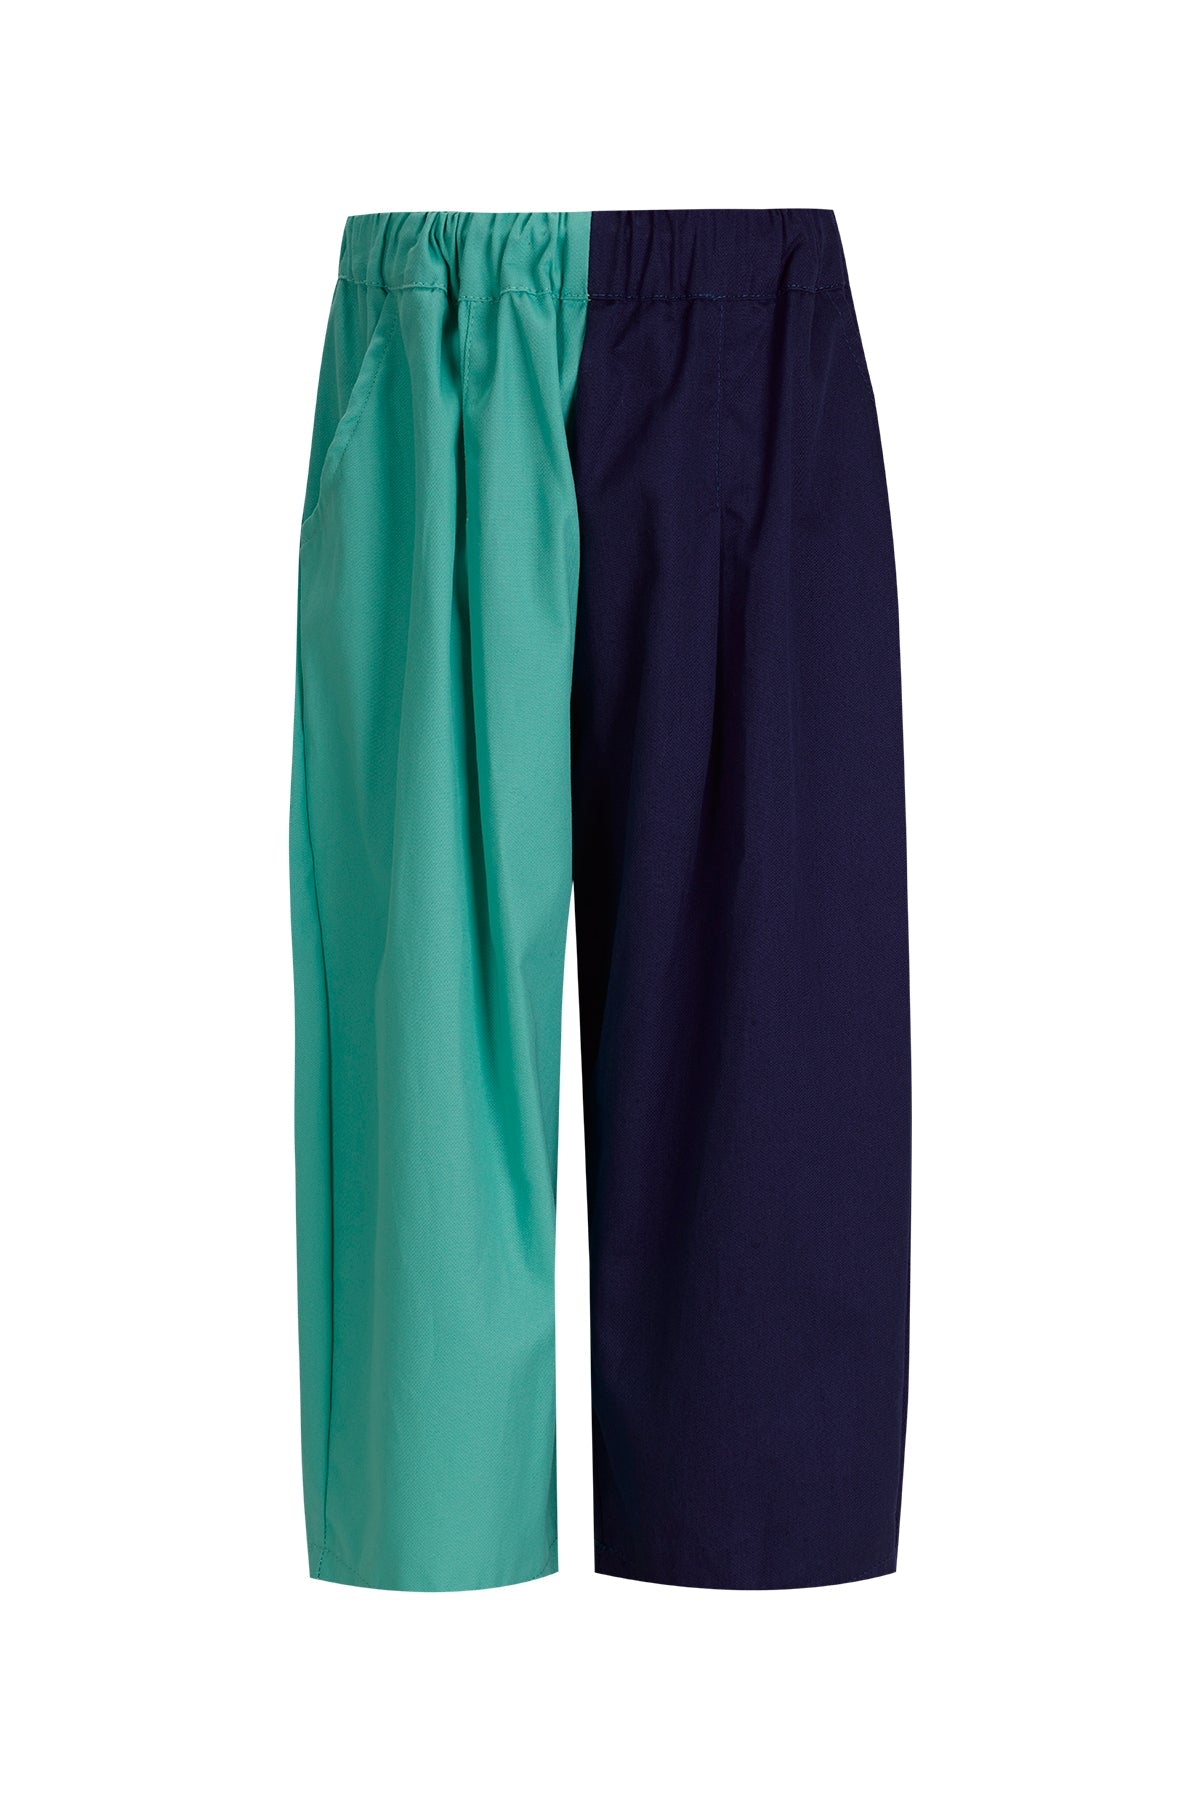 MINT AND NAVY LOOSE TROUSERS MA KIDS